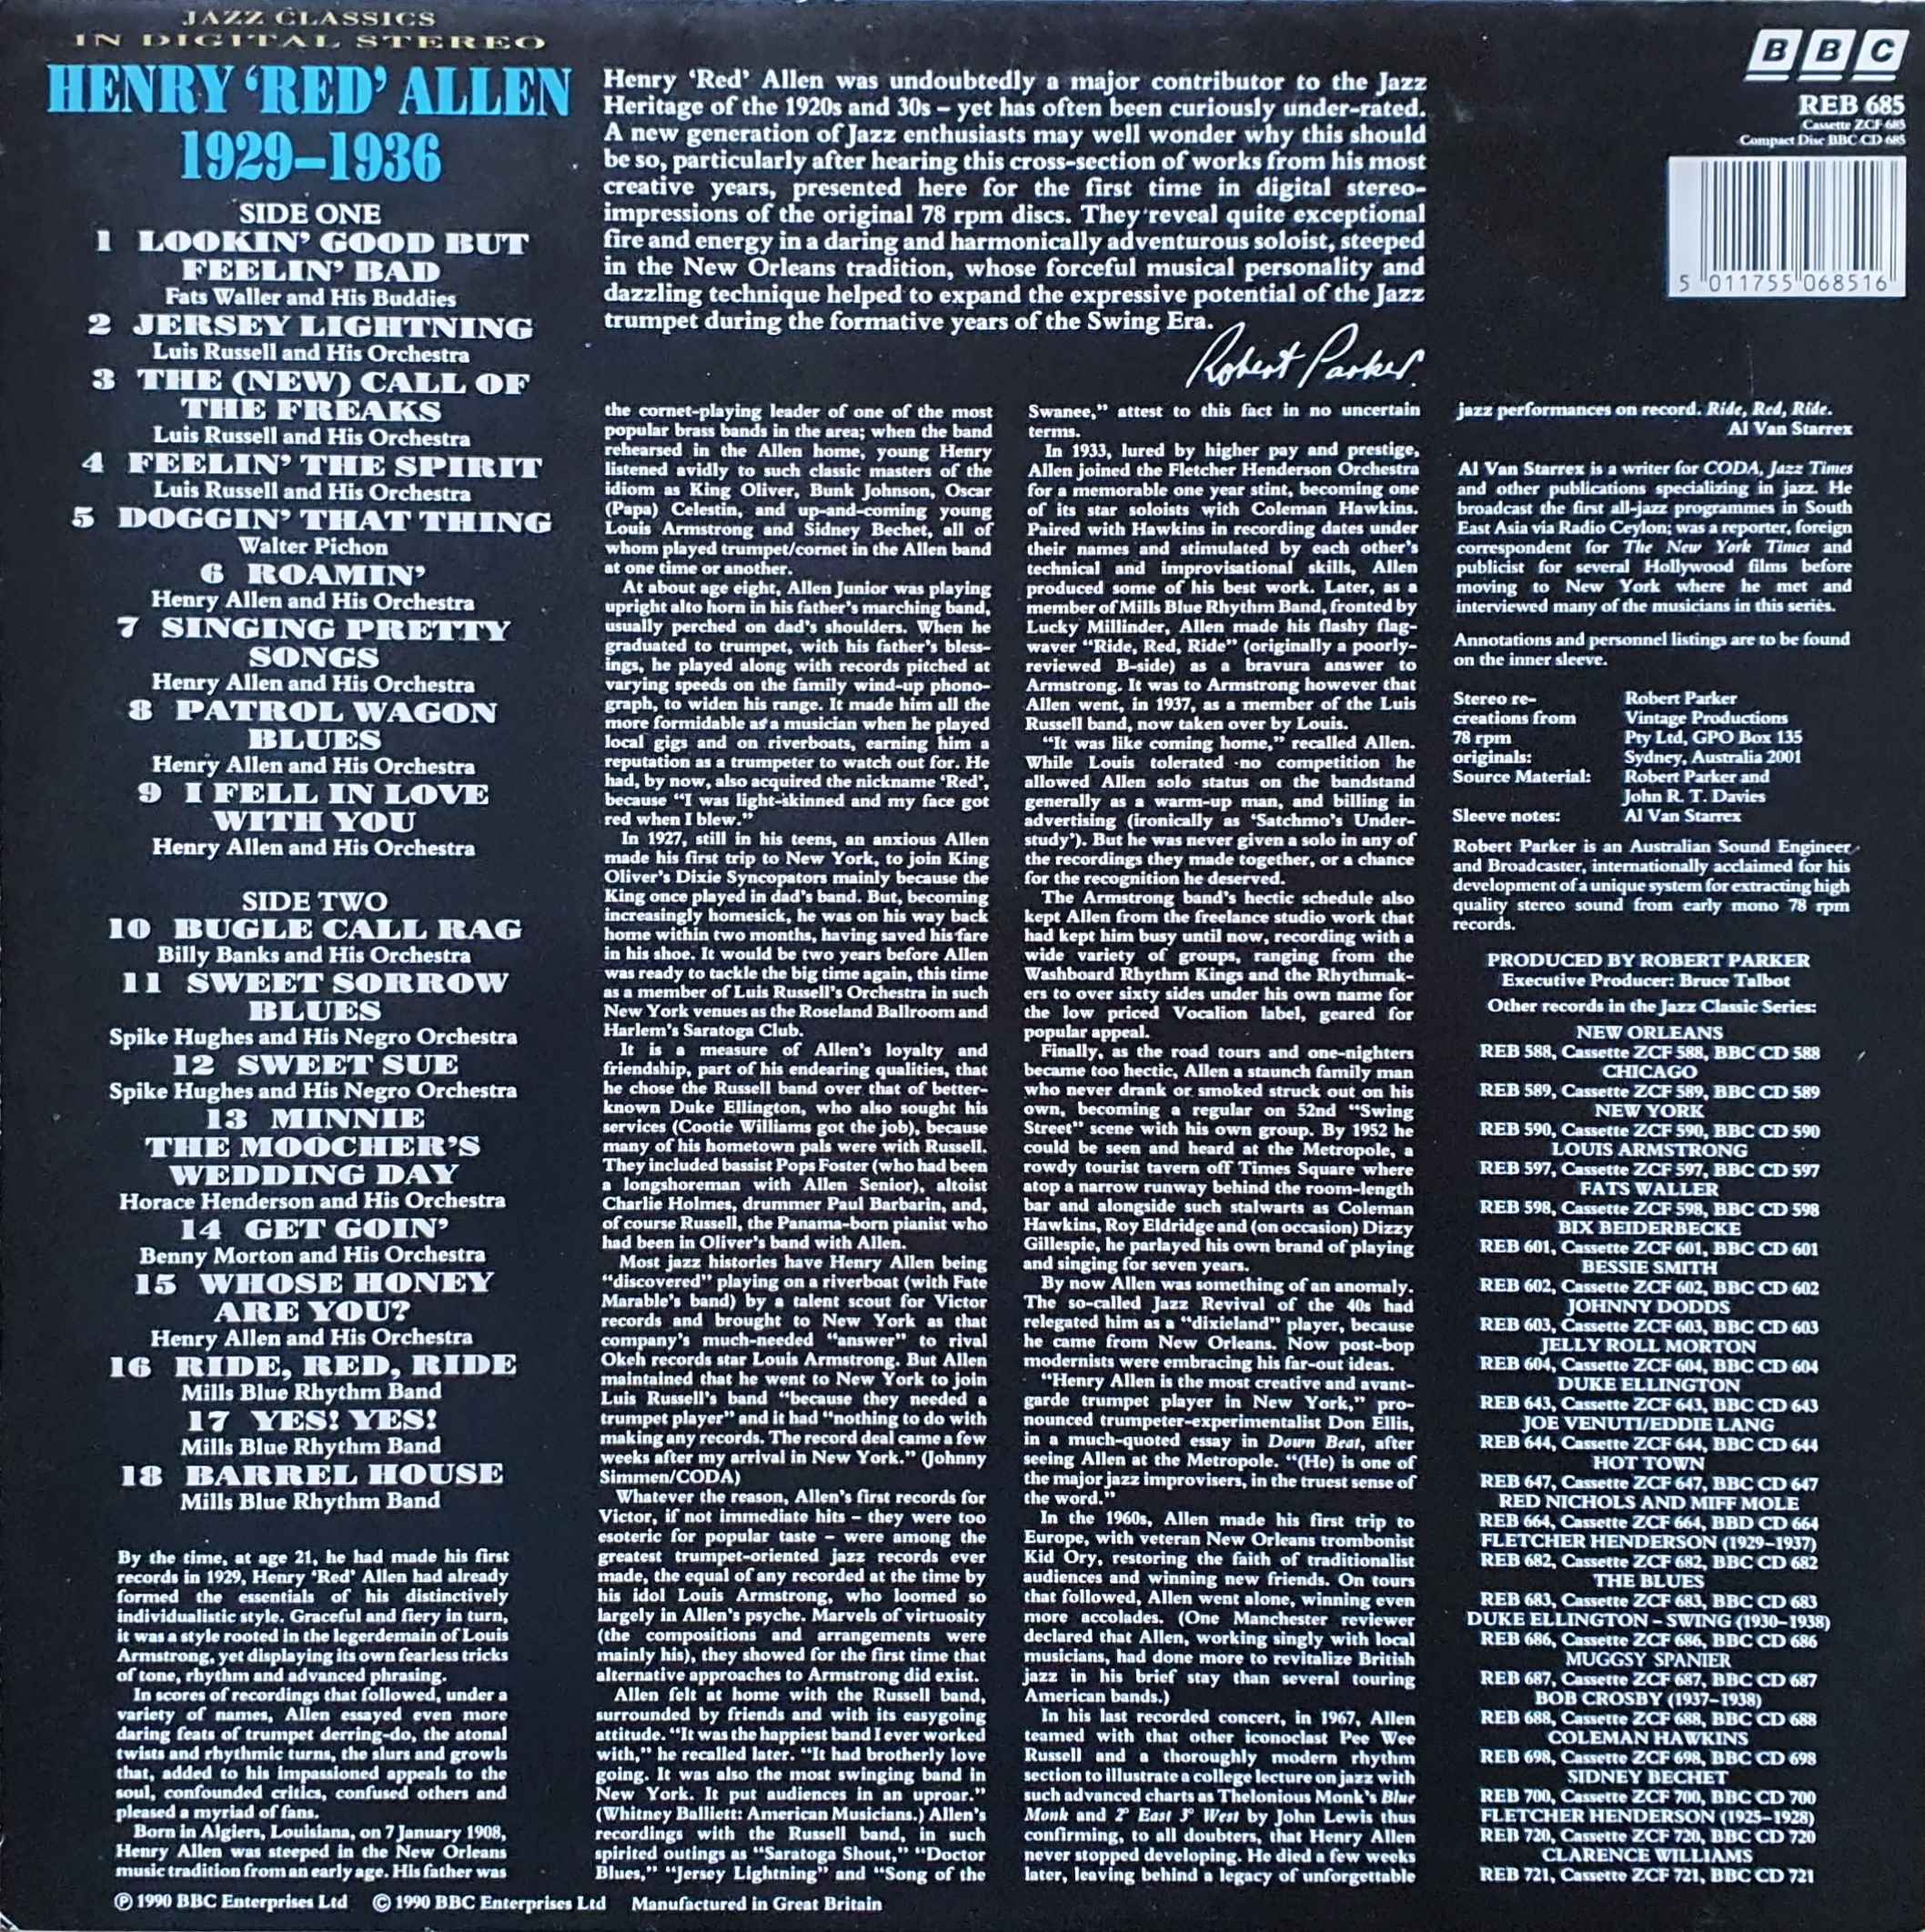 Back cover of REB 685